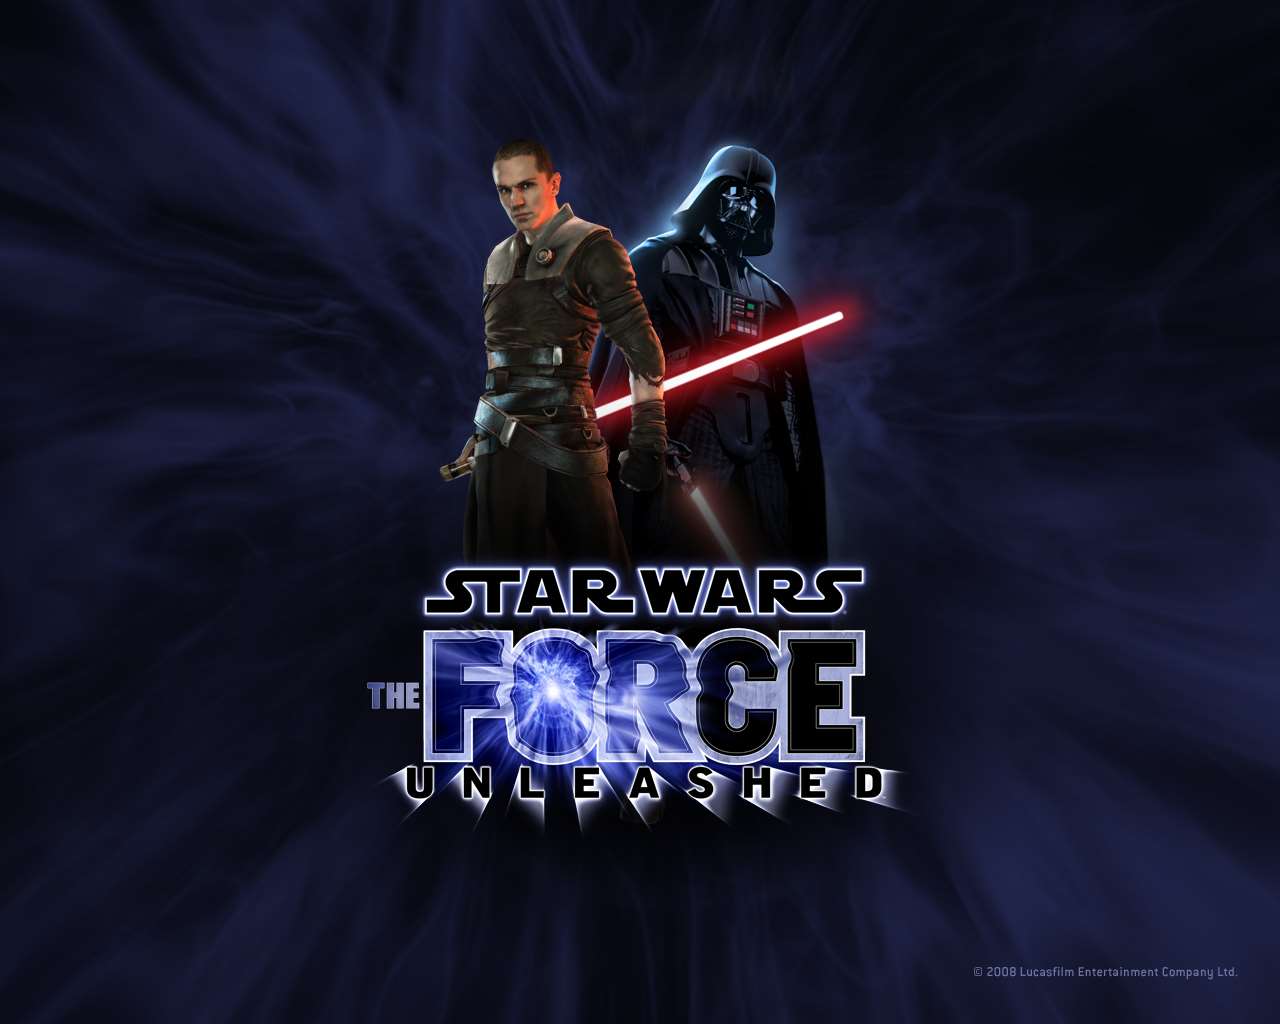 Star Wars The Force Unleashed Wallpapers - Top Free Star Wars The Force